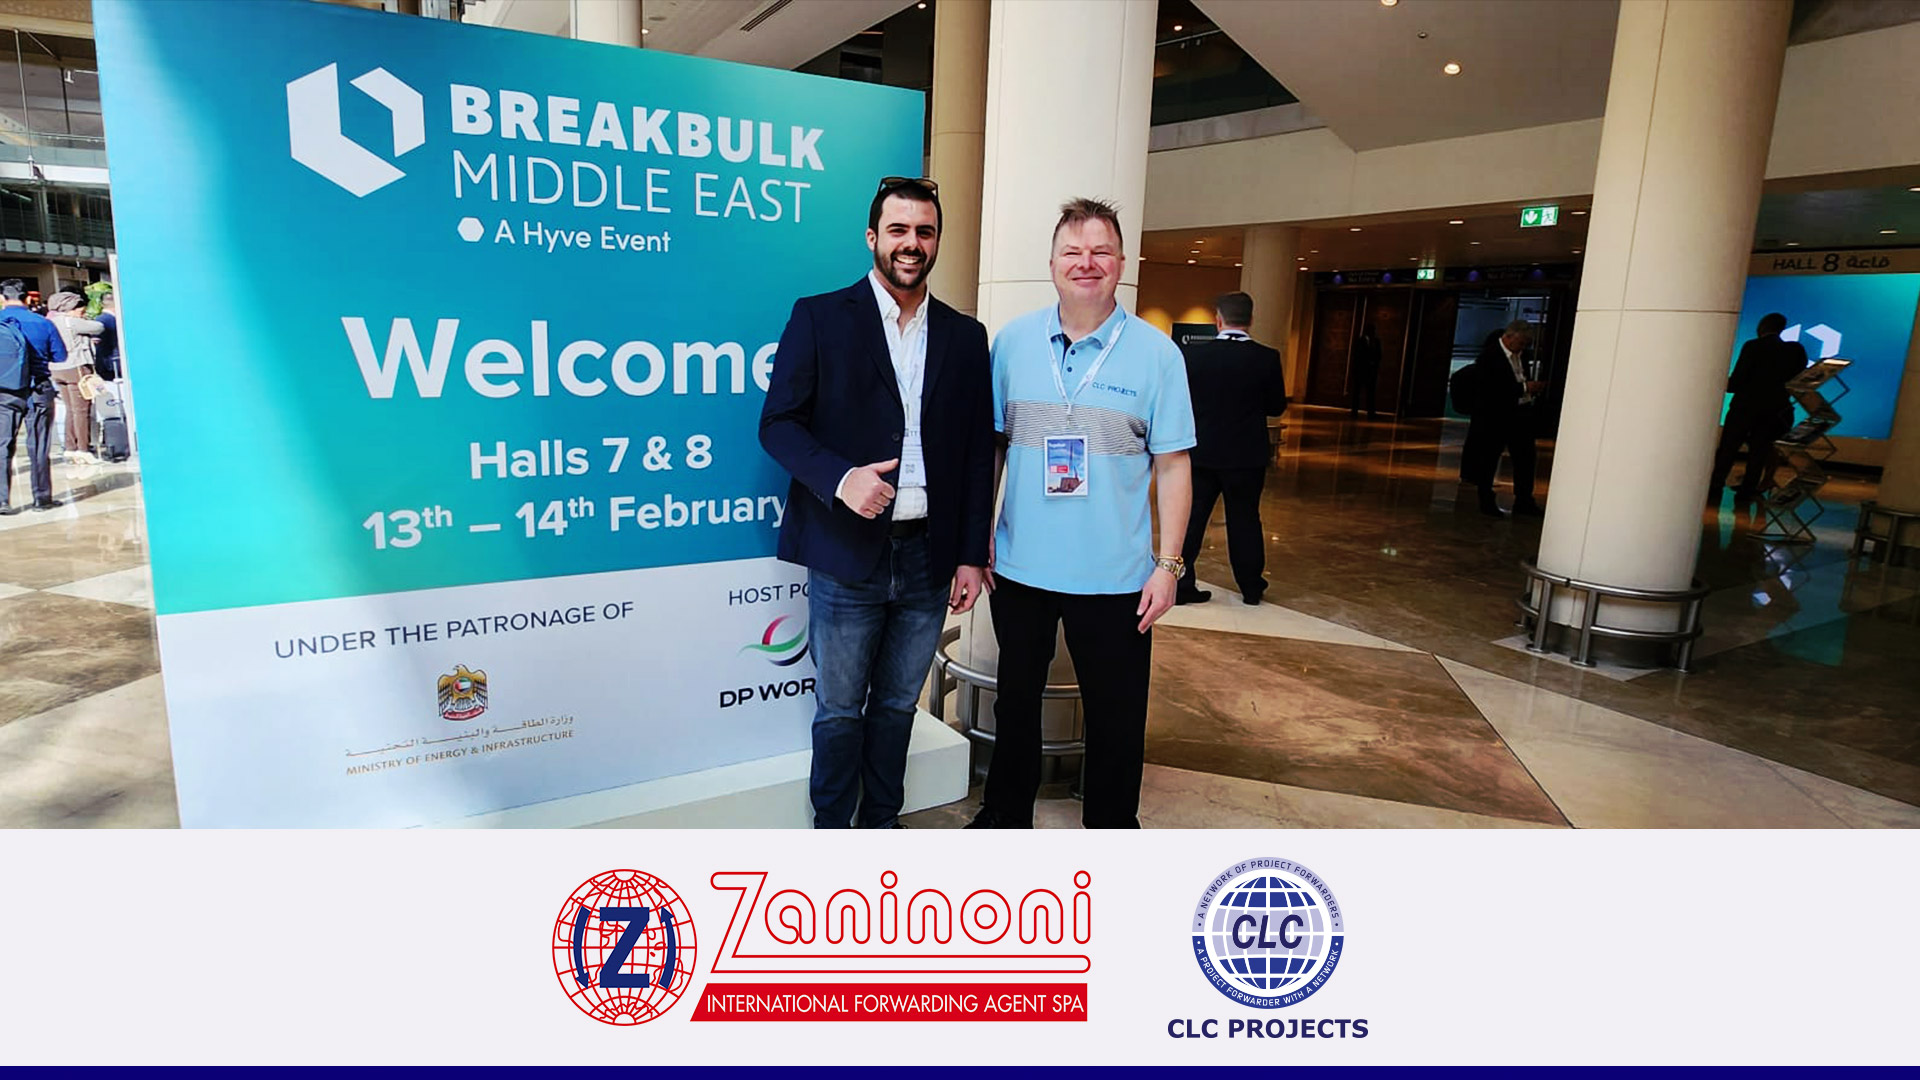 CLC Projects Chairman with Mr. Andrea Colombo of Zaninoni at Breakbulk Middle East 2023